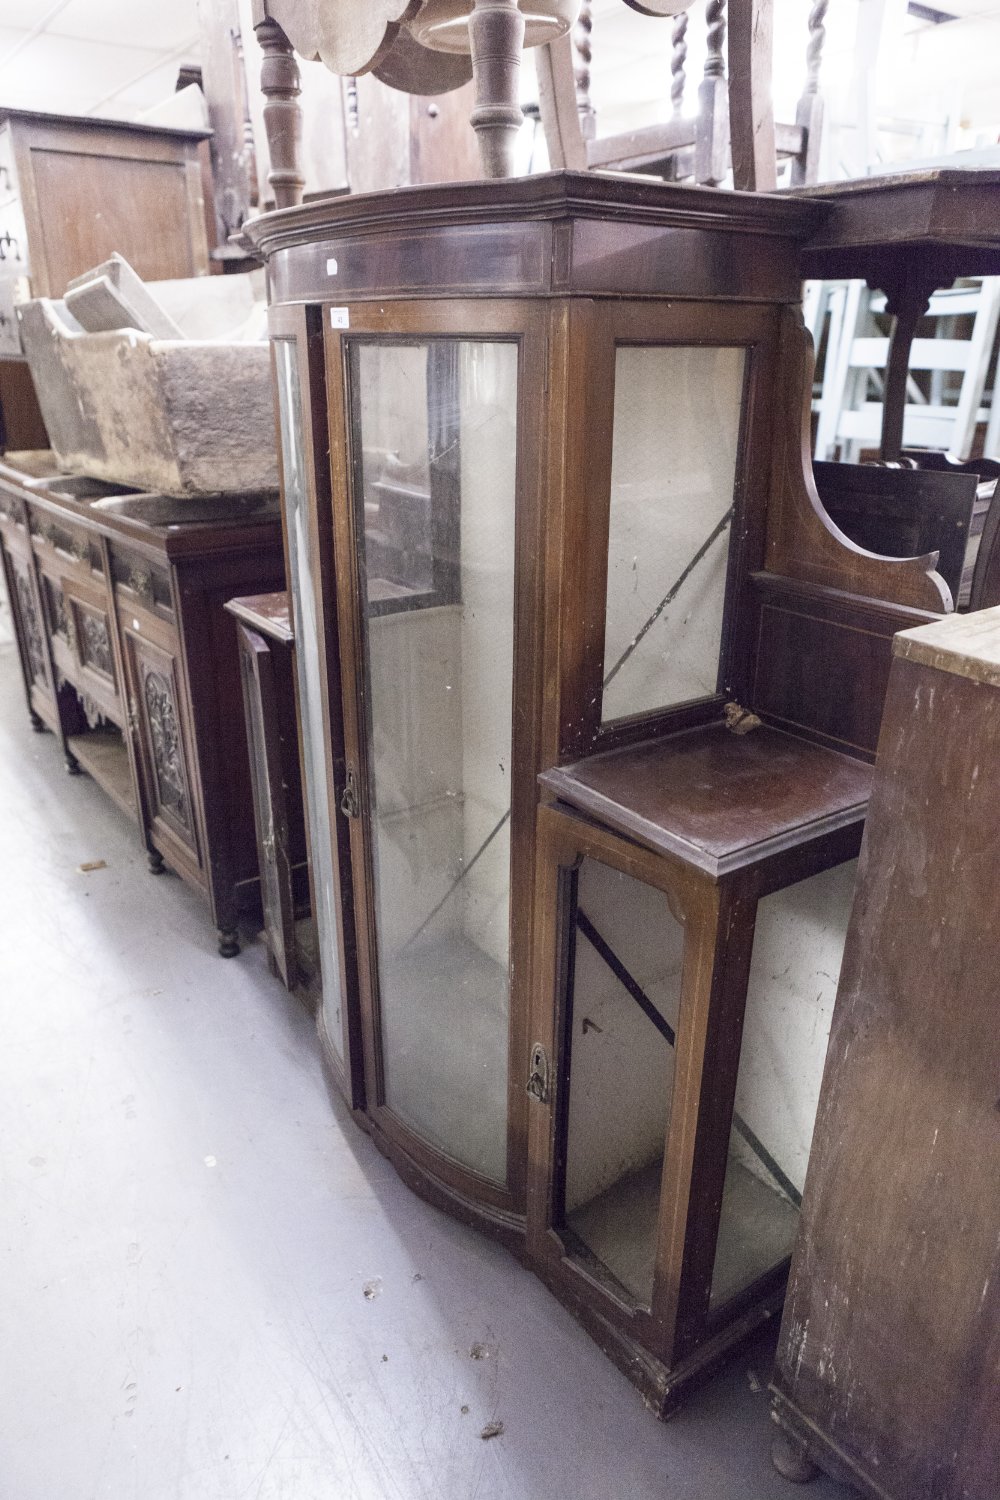 AN EARLY TWENTIETH CENTURY BREAKFRONT DISPLAY CABINET (PREVIOUS DISPLAY STAND) WITH CHEQUER BOARD